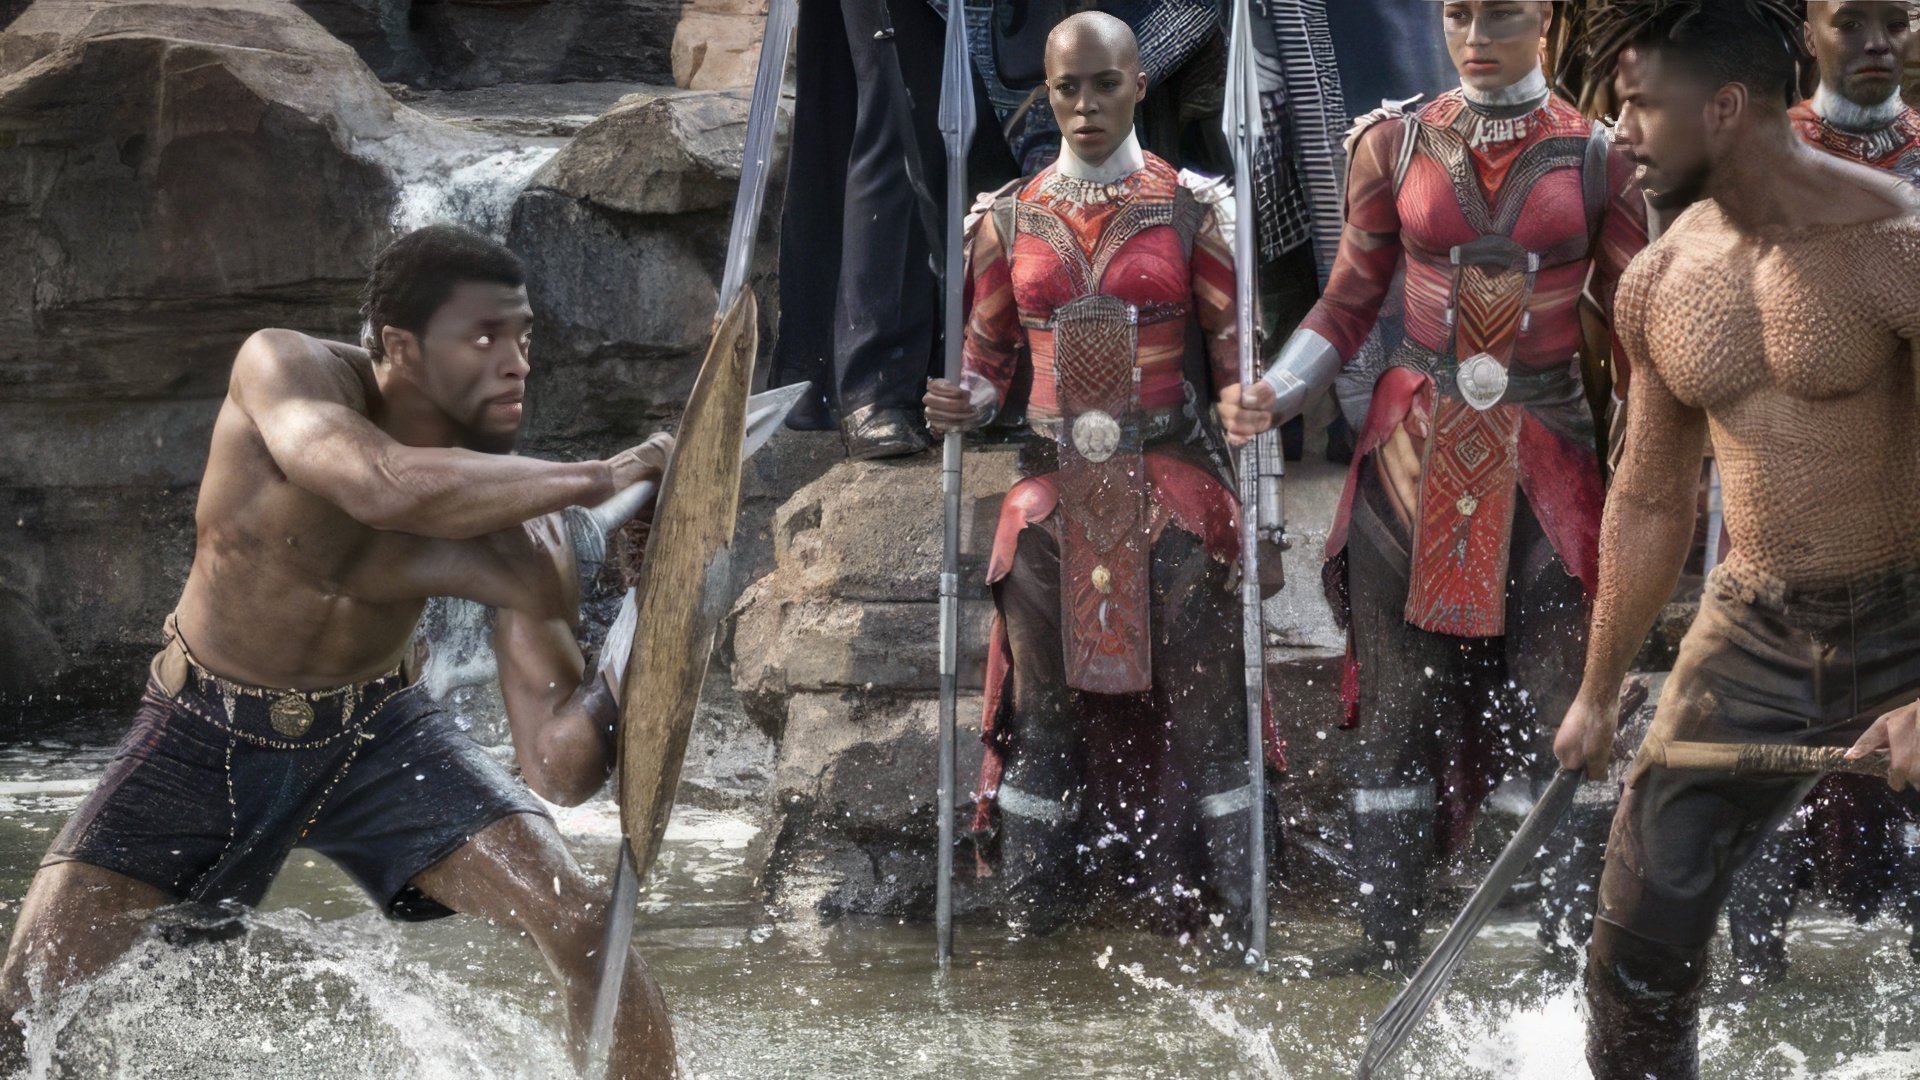 A scene from the movie 'Black Panther'